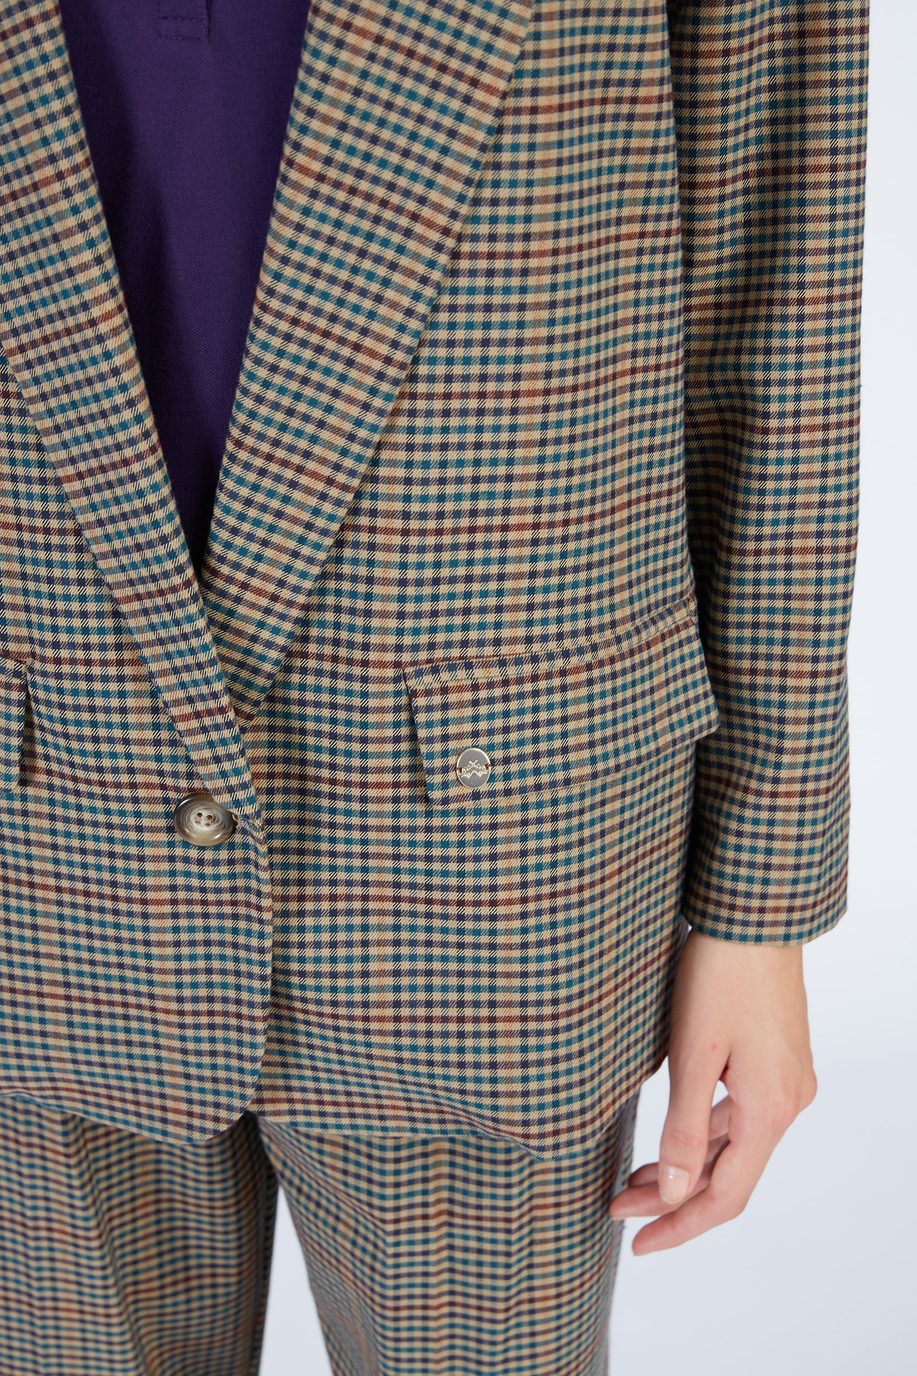 Women’s single-breasted twill jacquard blazer with pockets in regular fit - Outerwear | La Martina - Official Online Shop